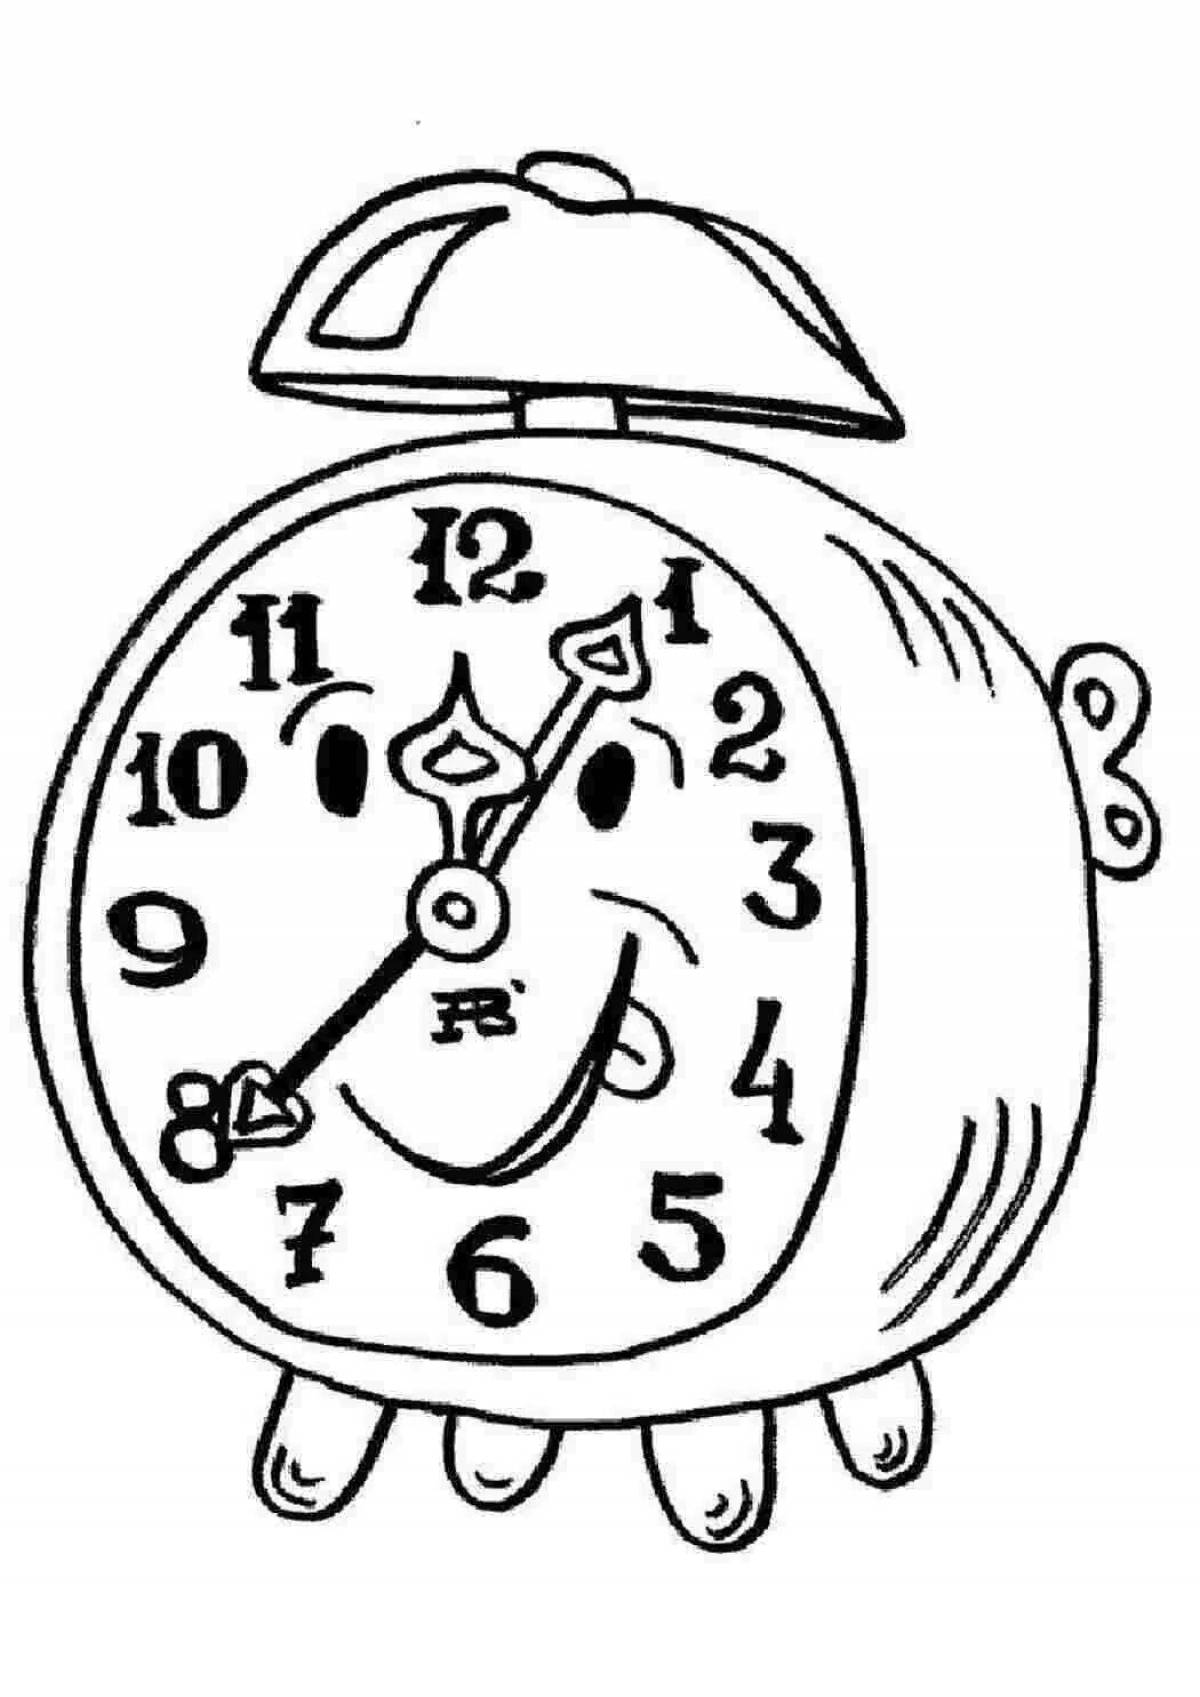 Colorful alarm clock coloring for art whizzs